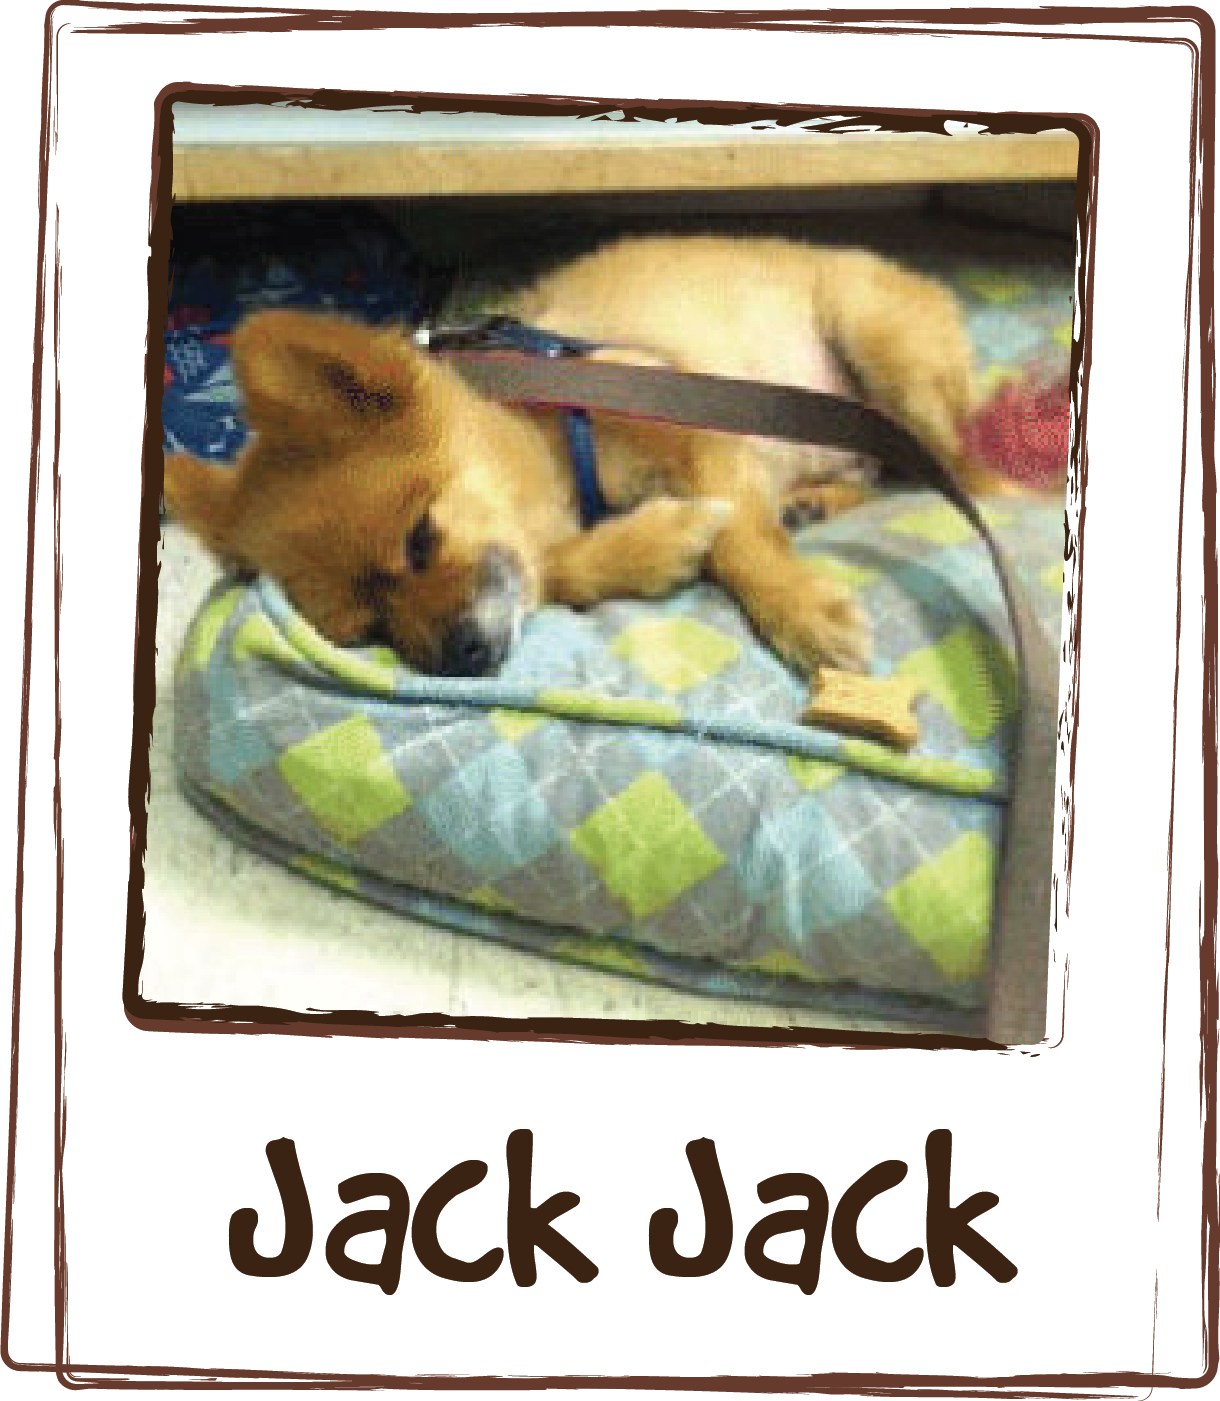  “Last night with the storms the Thundershirt didn’t even TOUCH Jack-Jack’s anxiety. Neither he nor I slept as he just sat next to me shaking and panting. When the storms hit again this morning, I came in, grabbed a packet of ZEN™ and he lapped it up